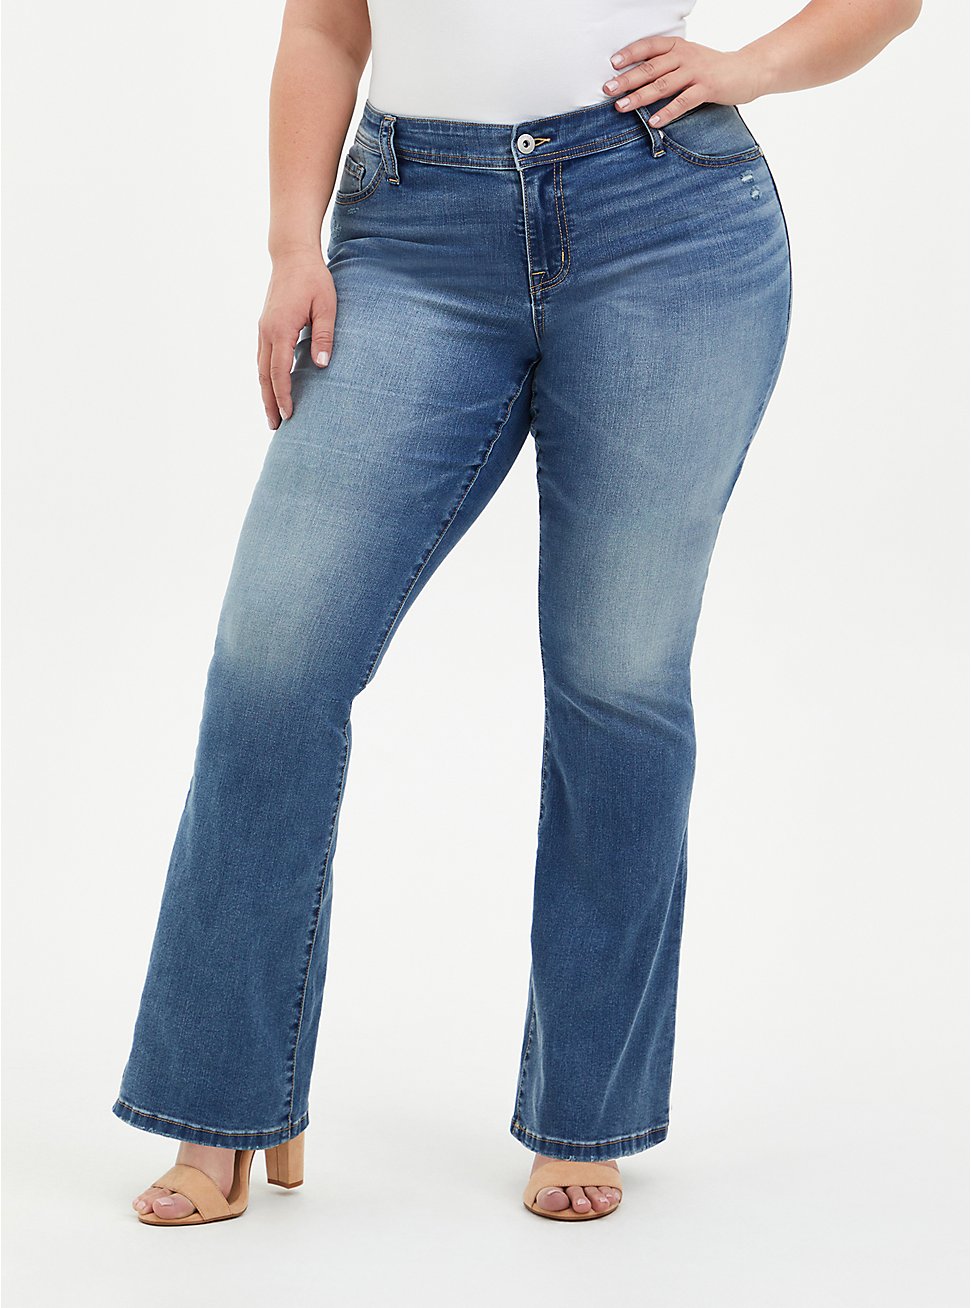 Plus Size Luxe Slim Boot Jean - Super Stretch Light Wash, TYPHOON, hi-res